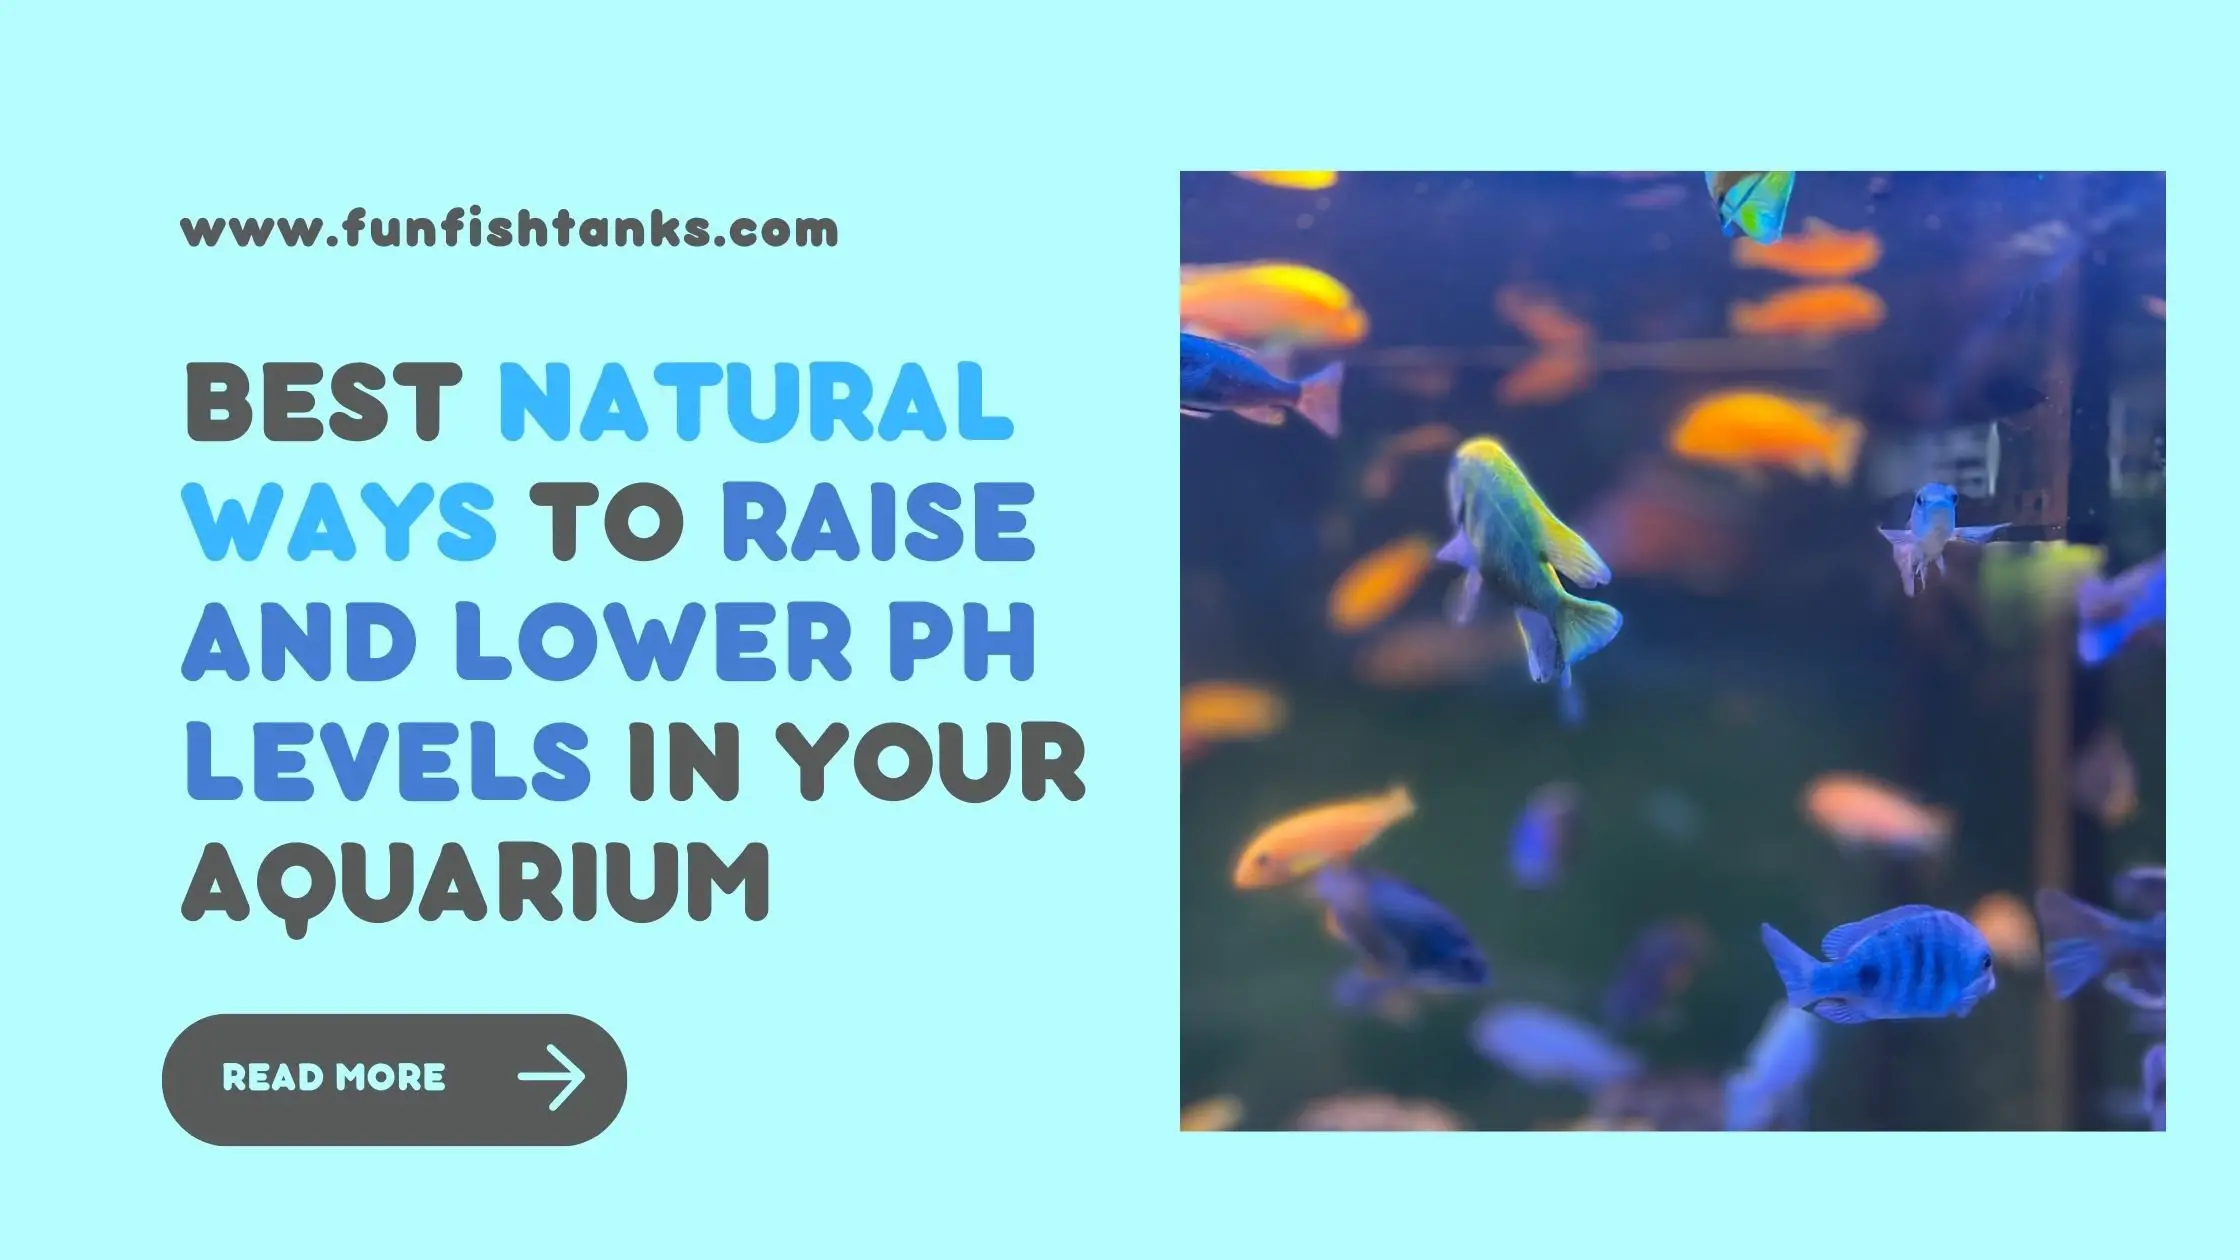 Best Natural Ways to Raise and Lower pH Levels